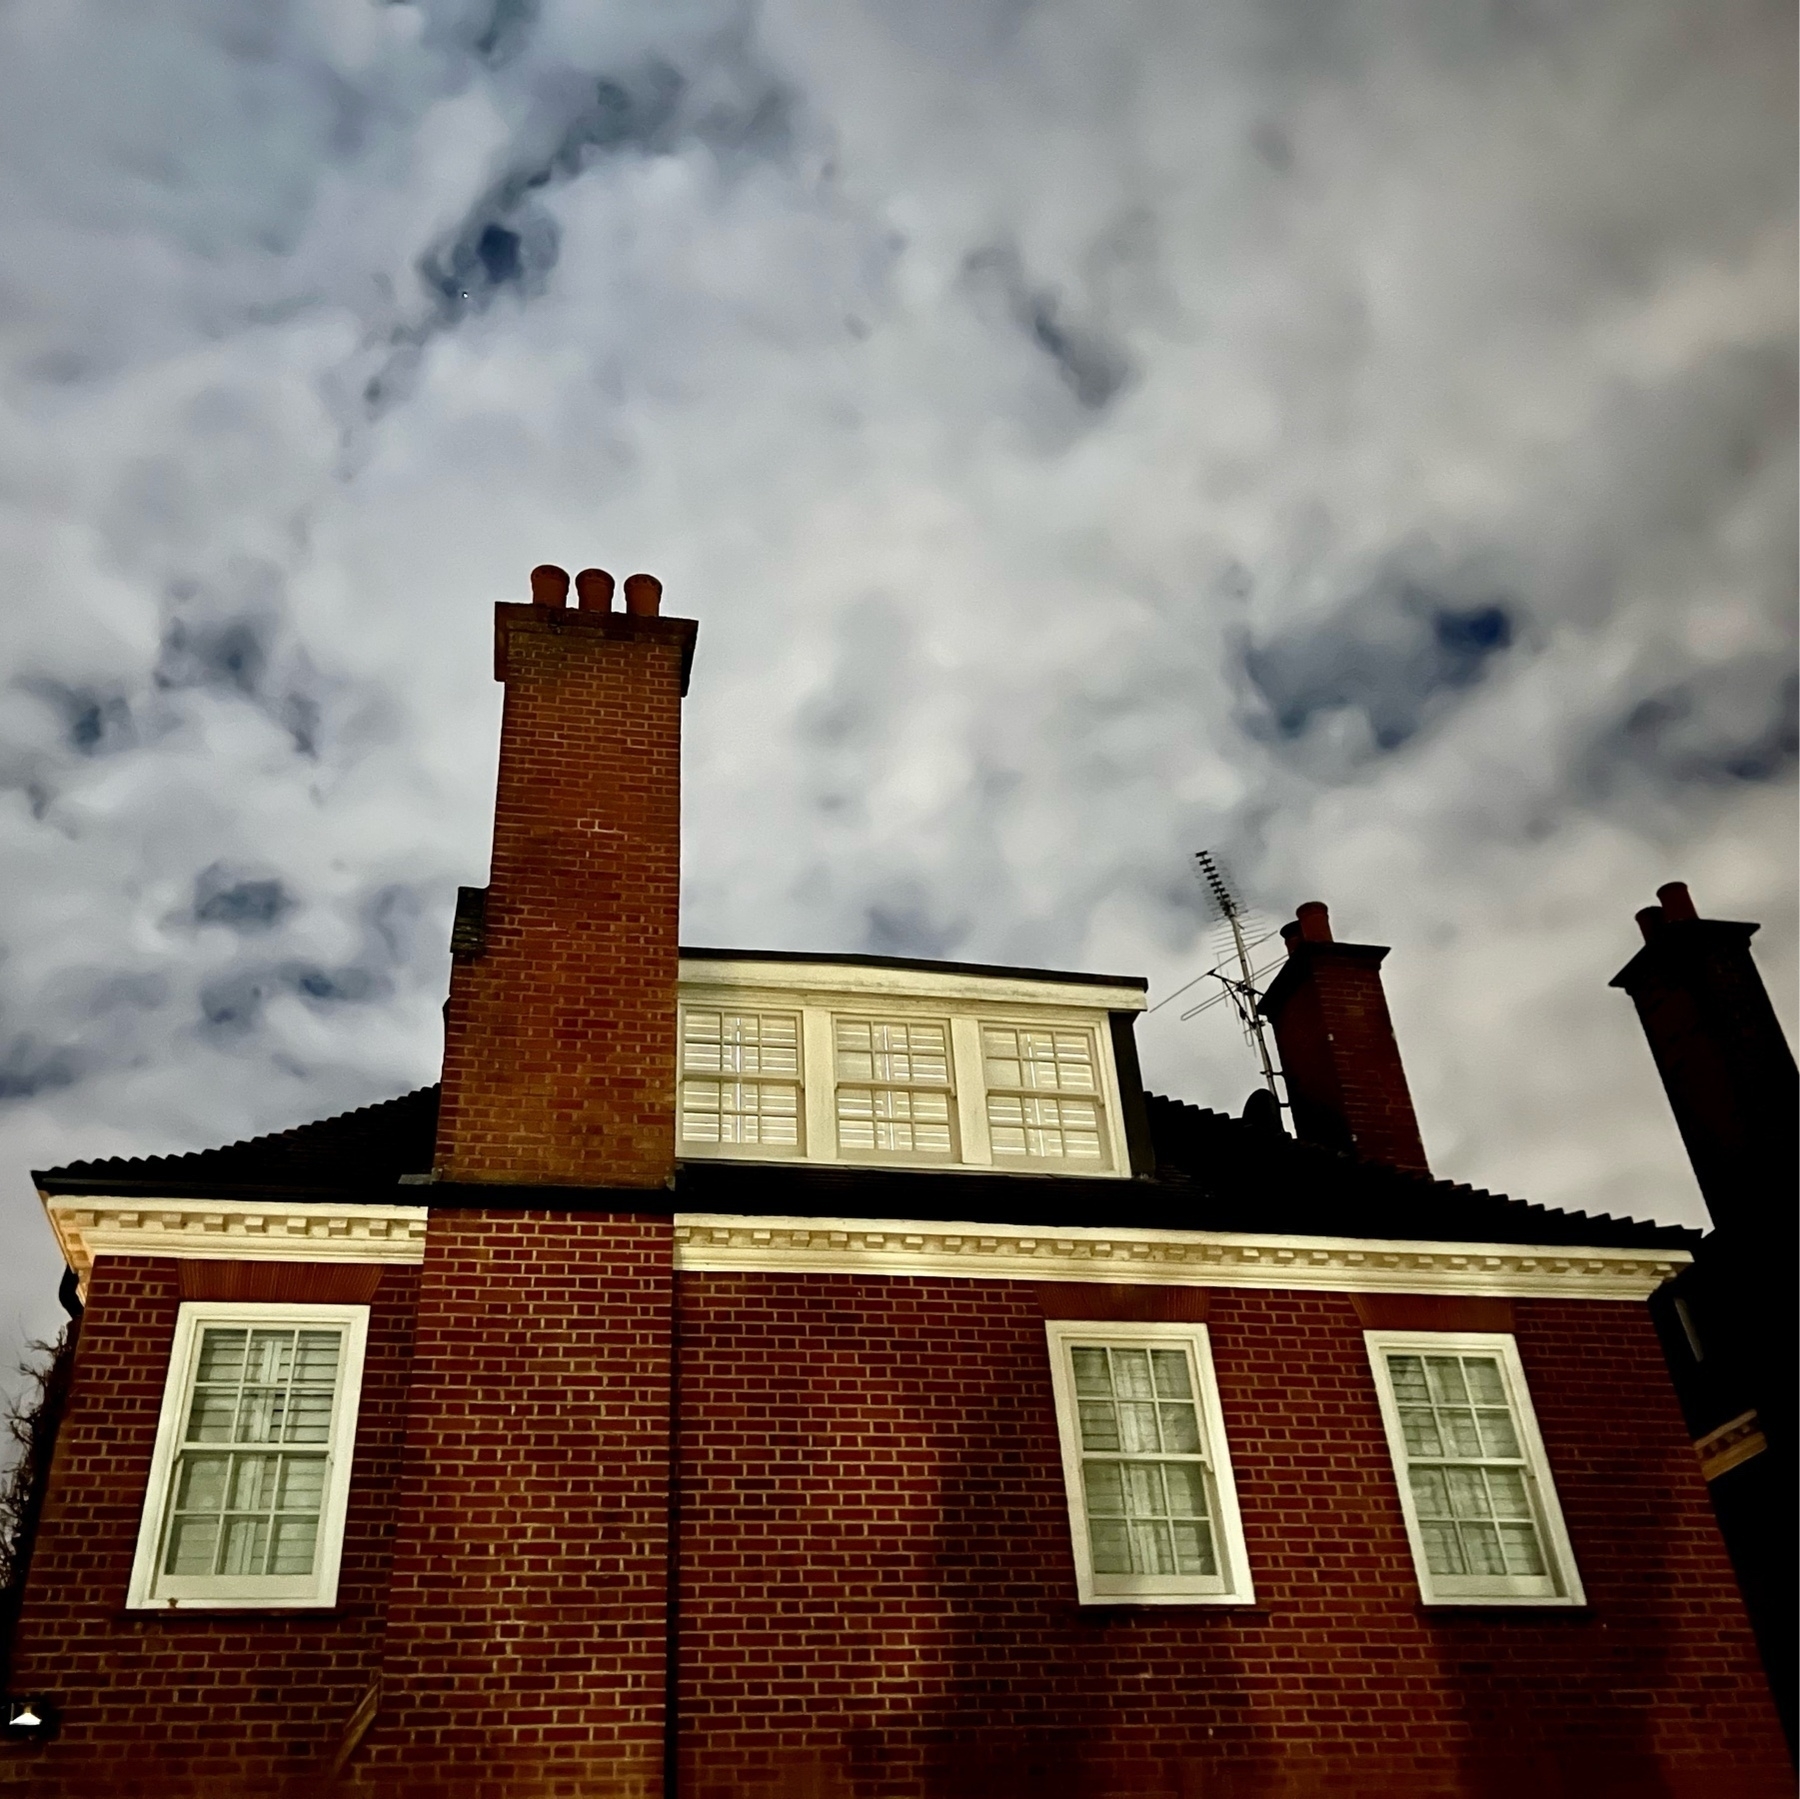 A house in Wandsworth, London. 